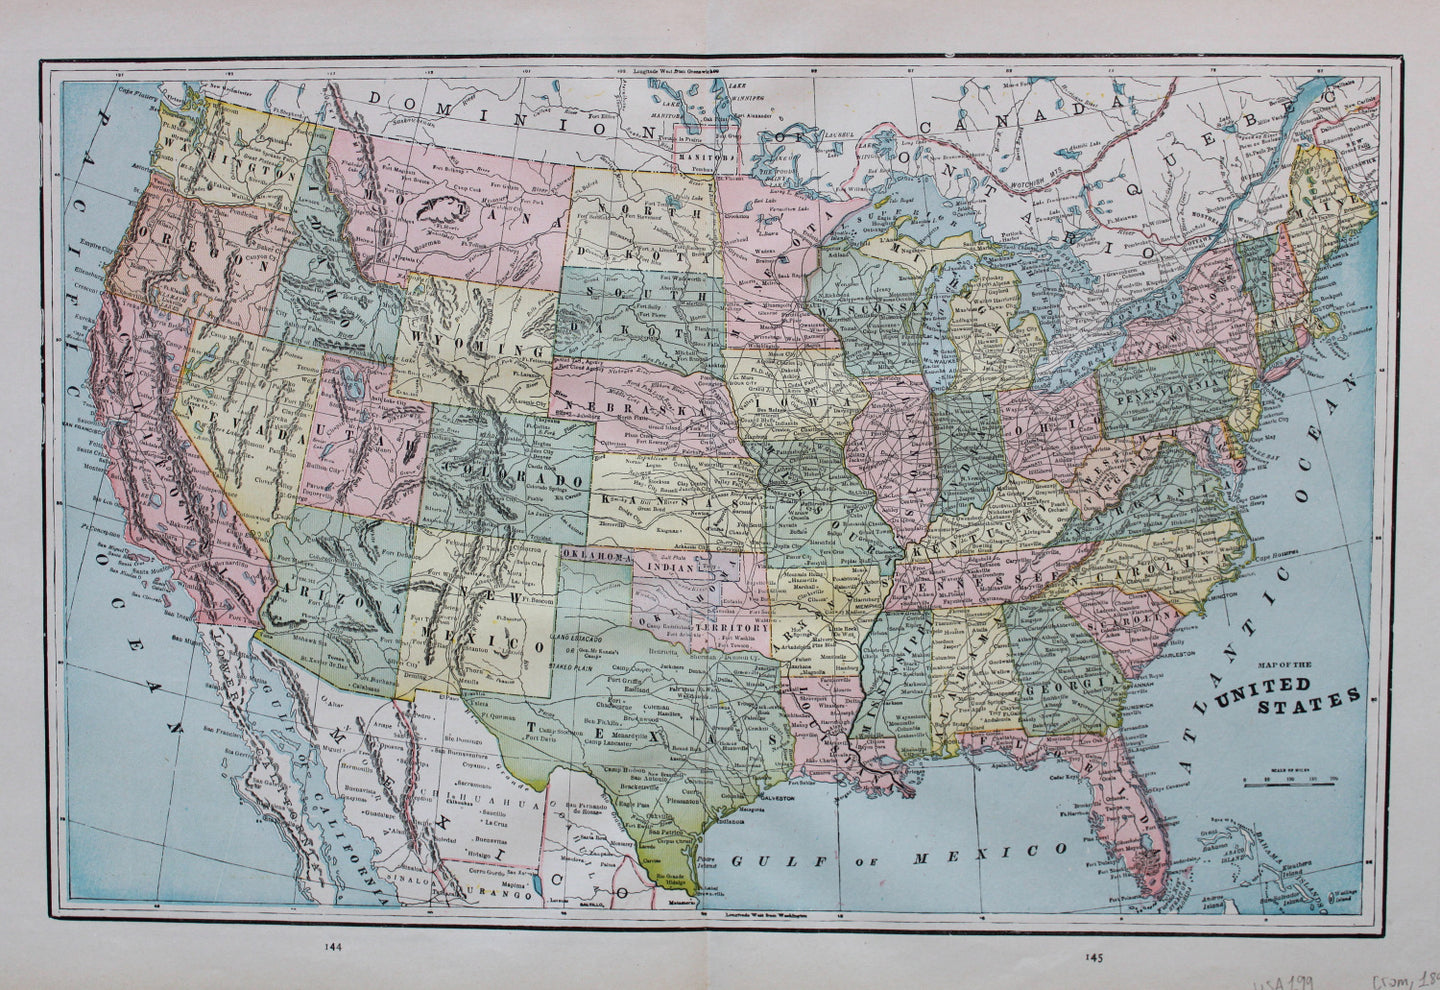 Antique-Printed-Color-Map-Map-of-The-United-States-verso:-Manitoba-and-Map-Showing-The-Acquisition-of-Territory-and-Its-Distribution-Among-Political-Divisions-1776-1886-United-States-United-States-General-1894-Cram-Maps-Of-Antiquity